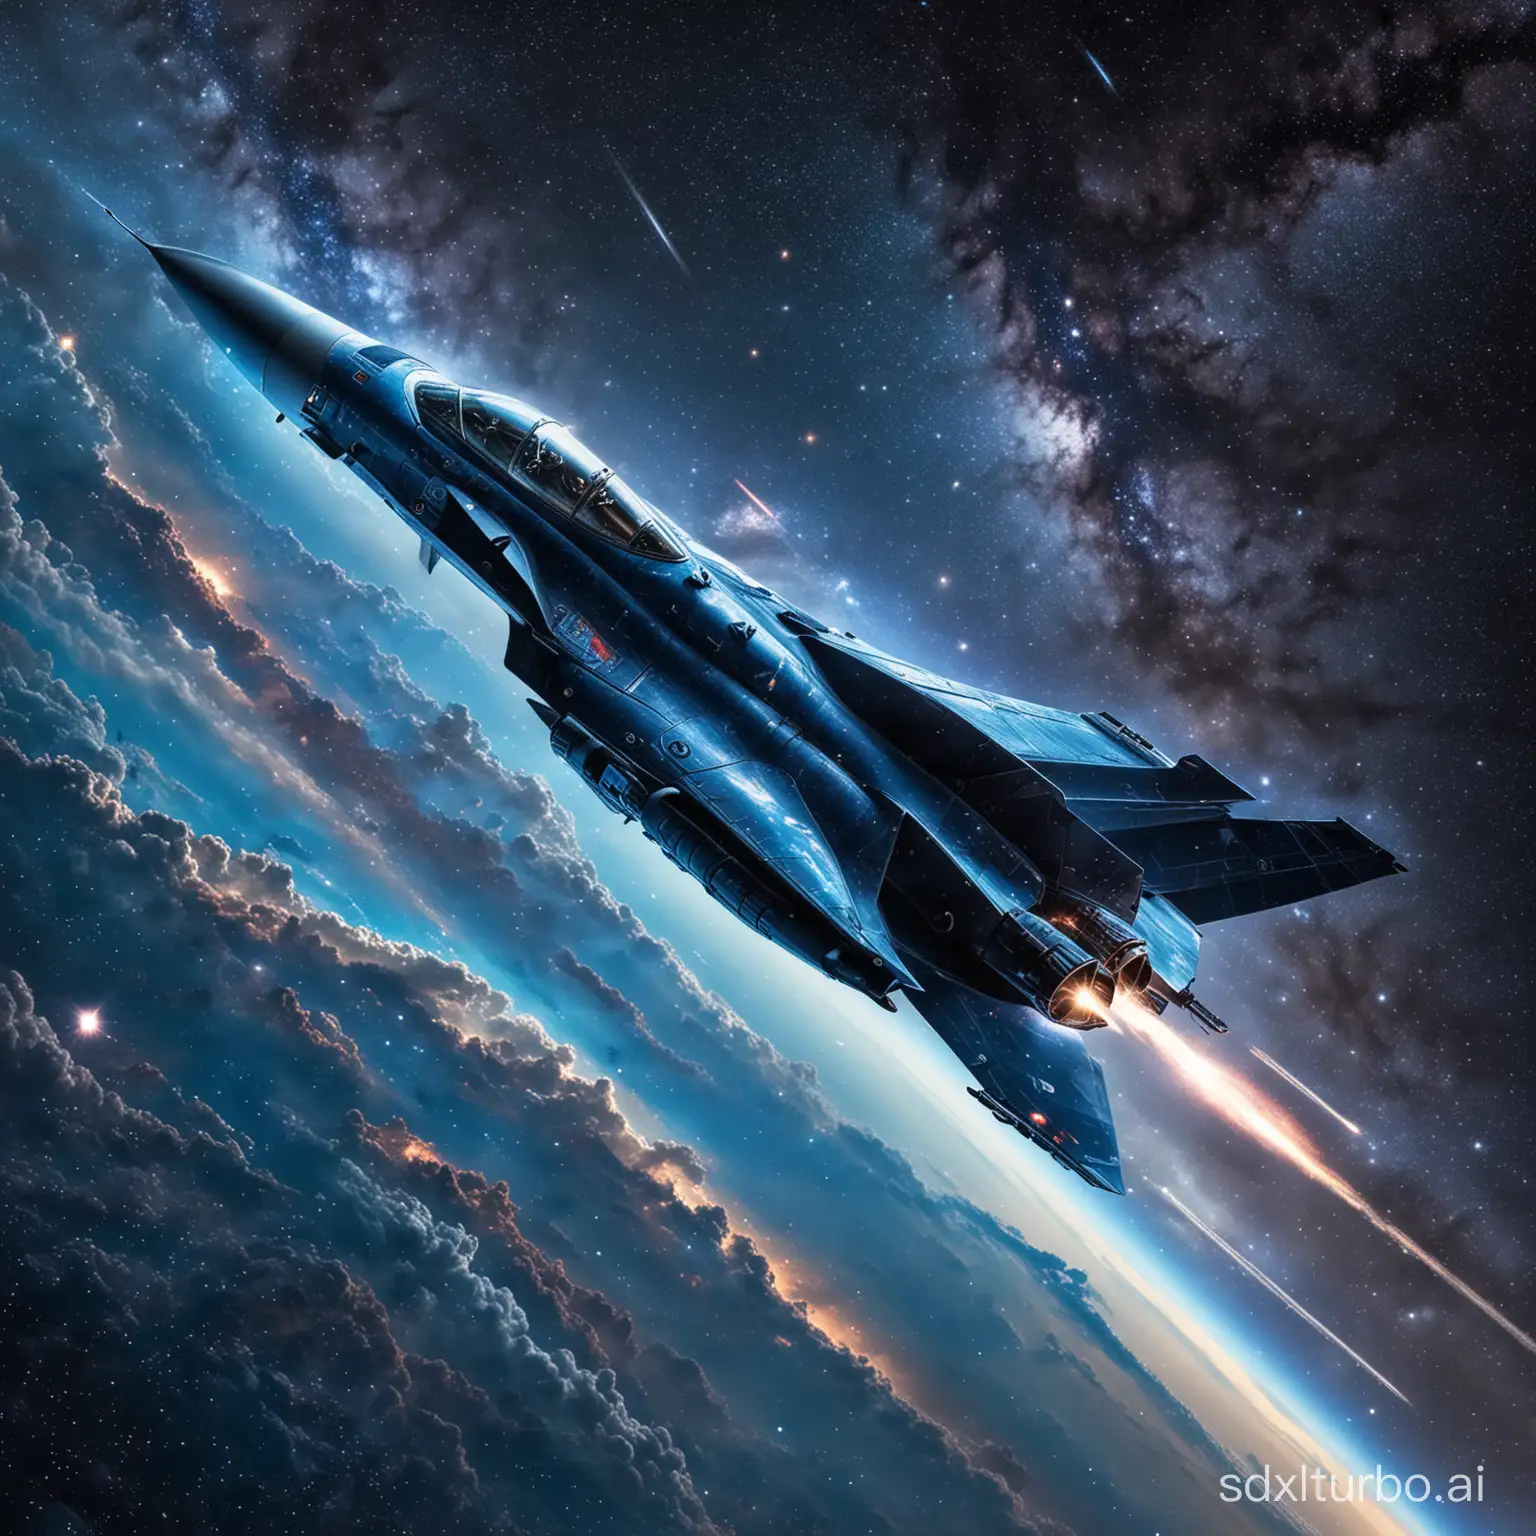 Blue fighter jet of the Milky Way galaxy